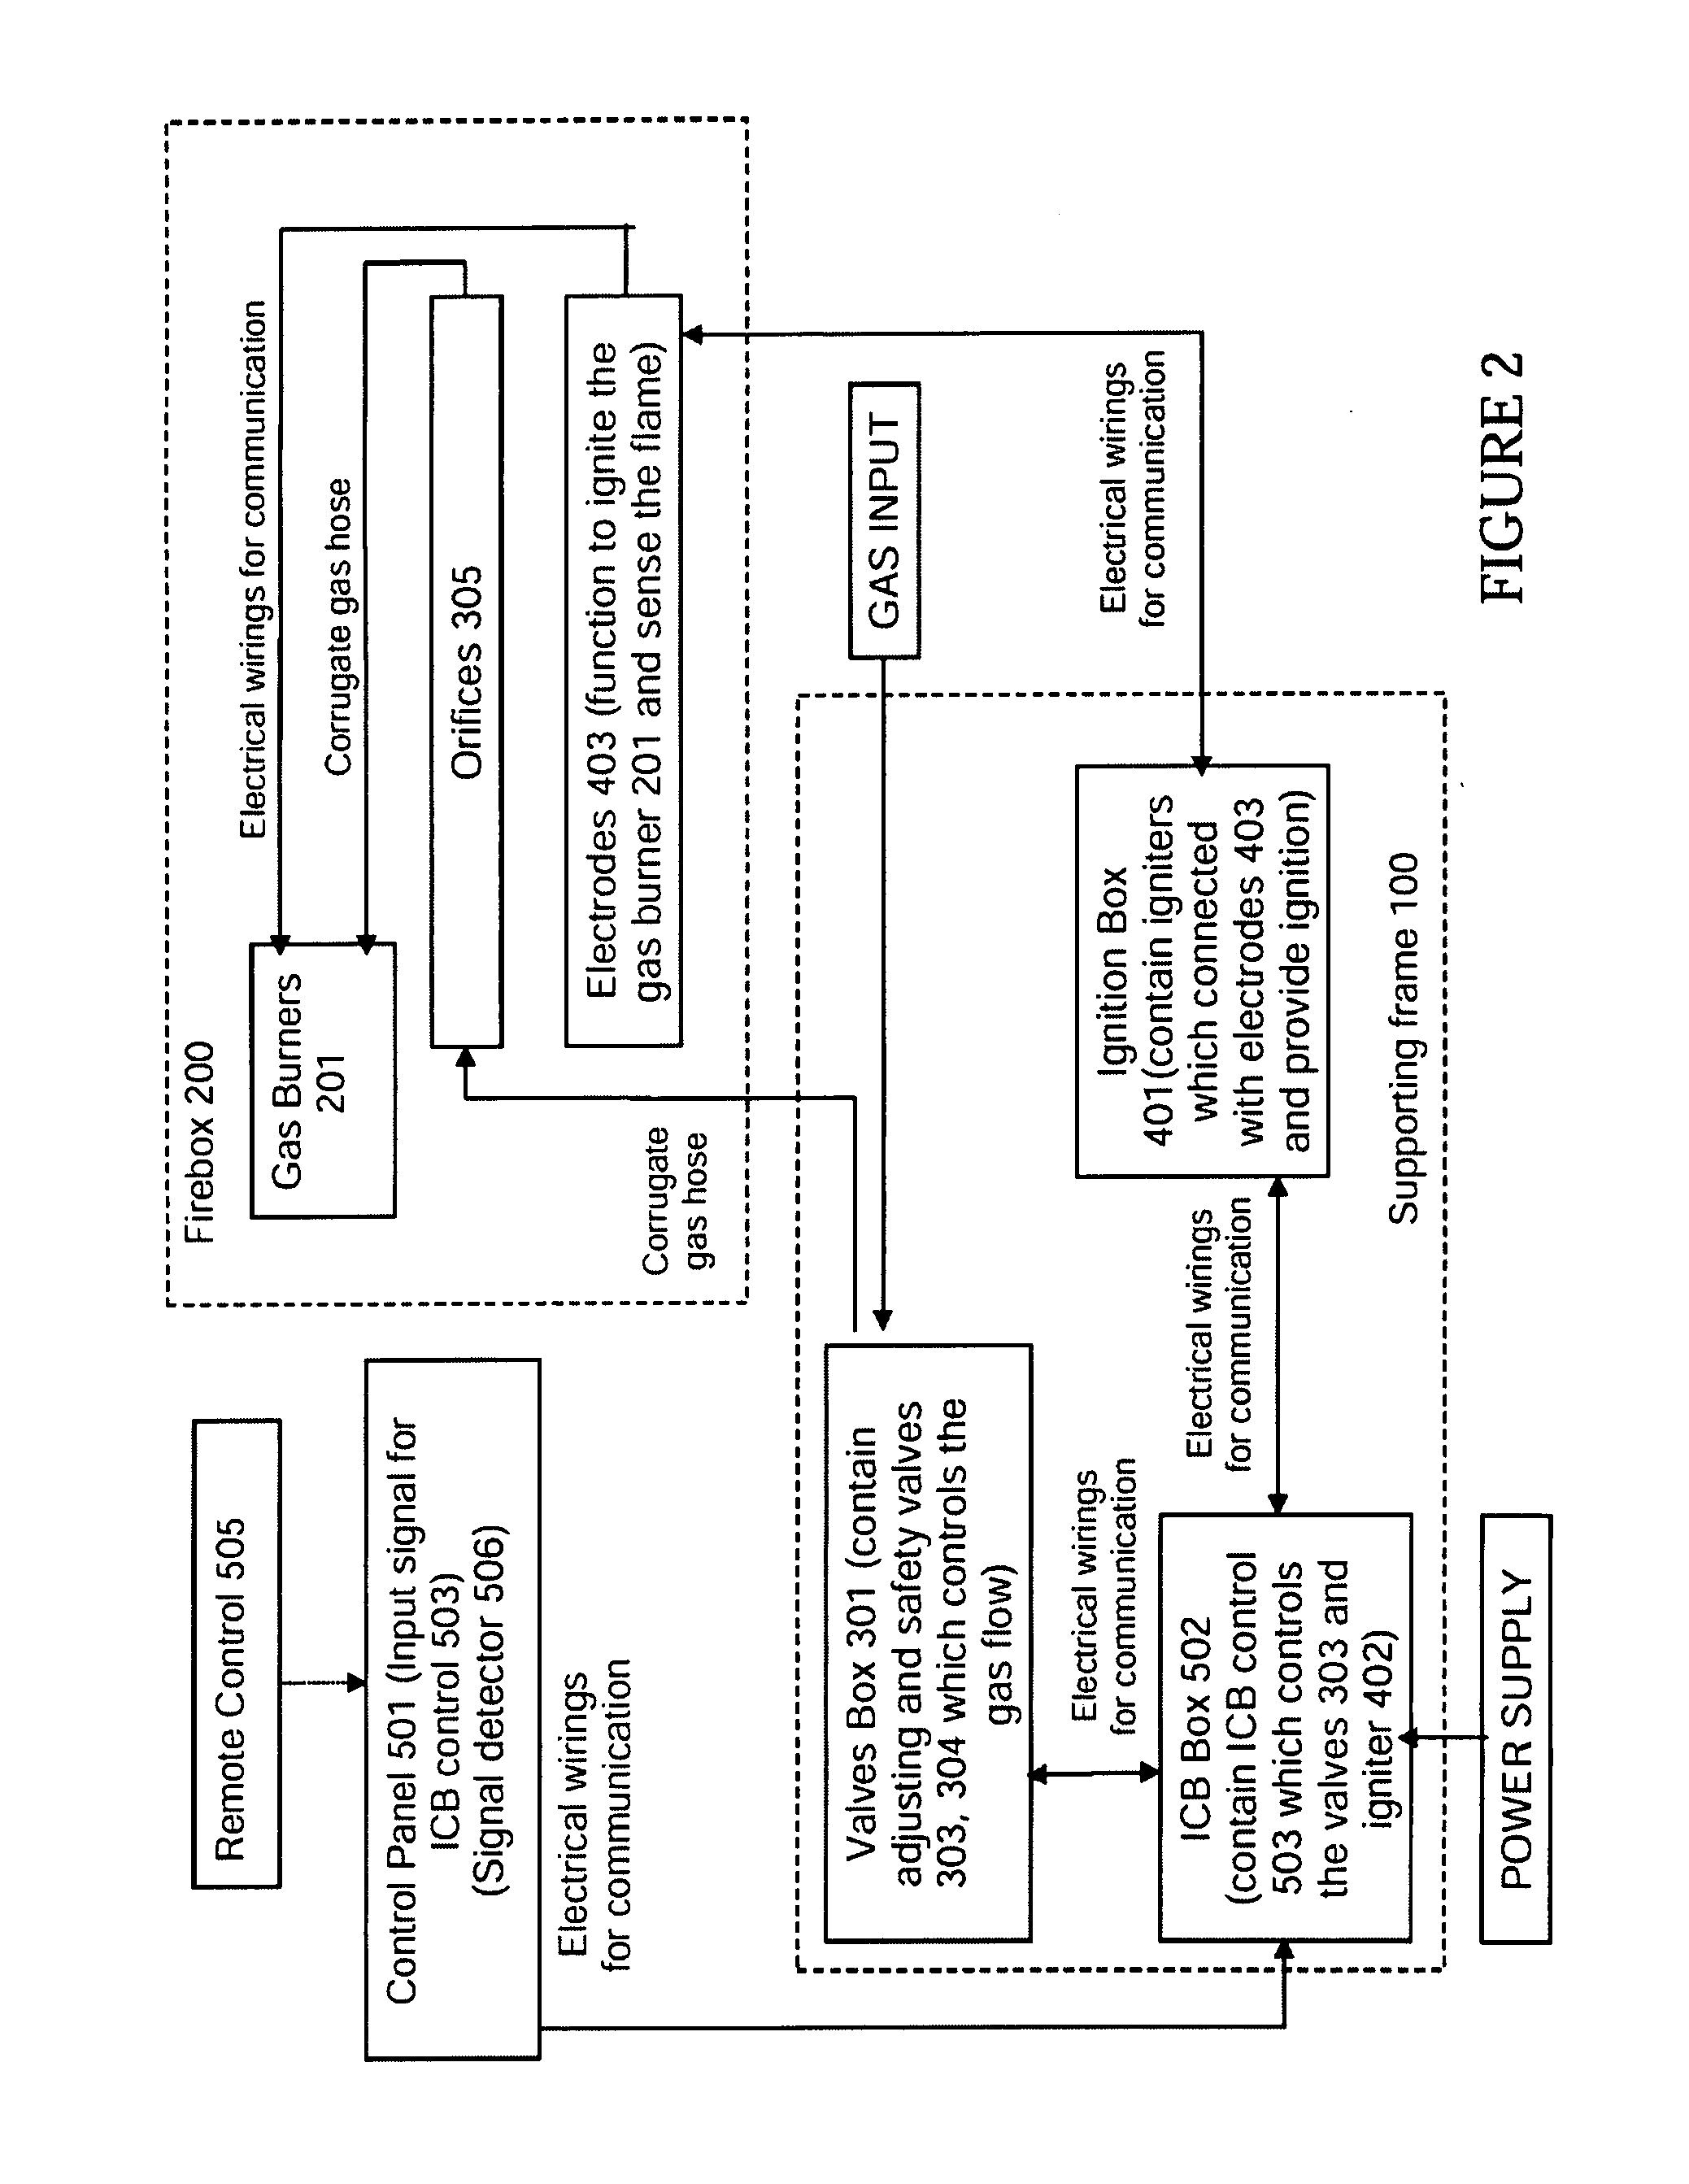 Gas grill apparatus with integrated modules